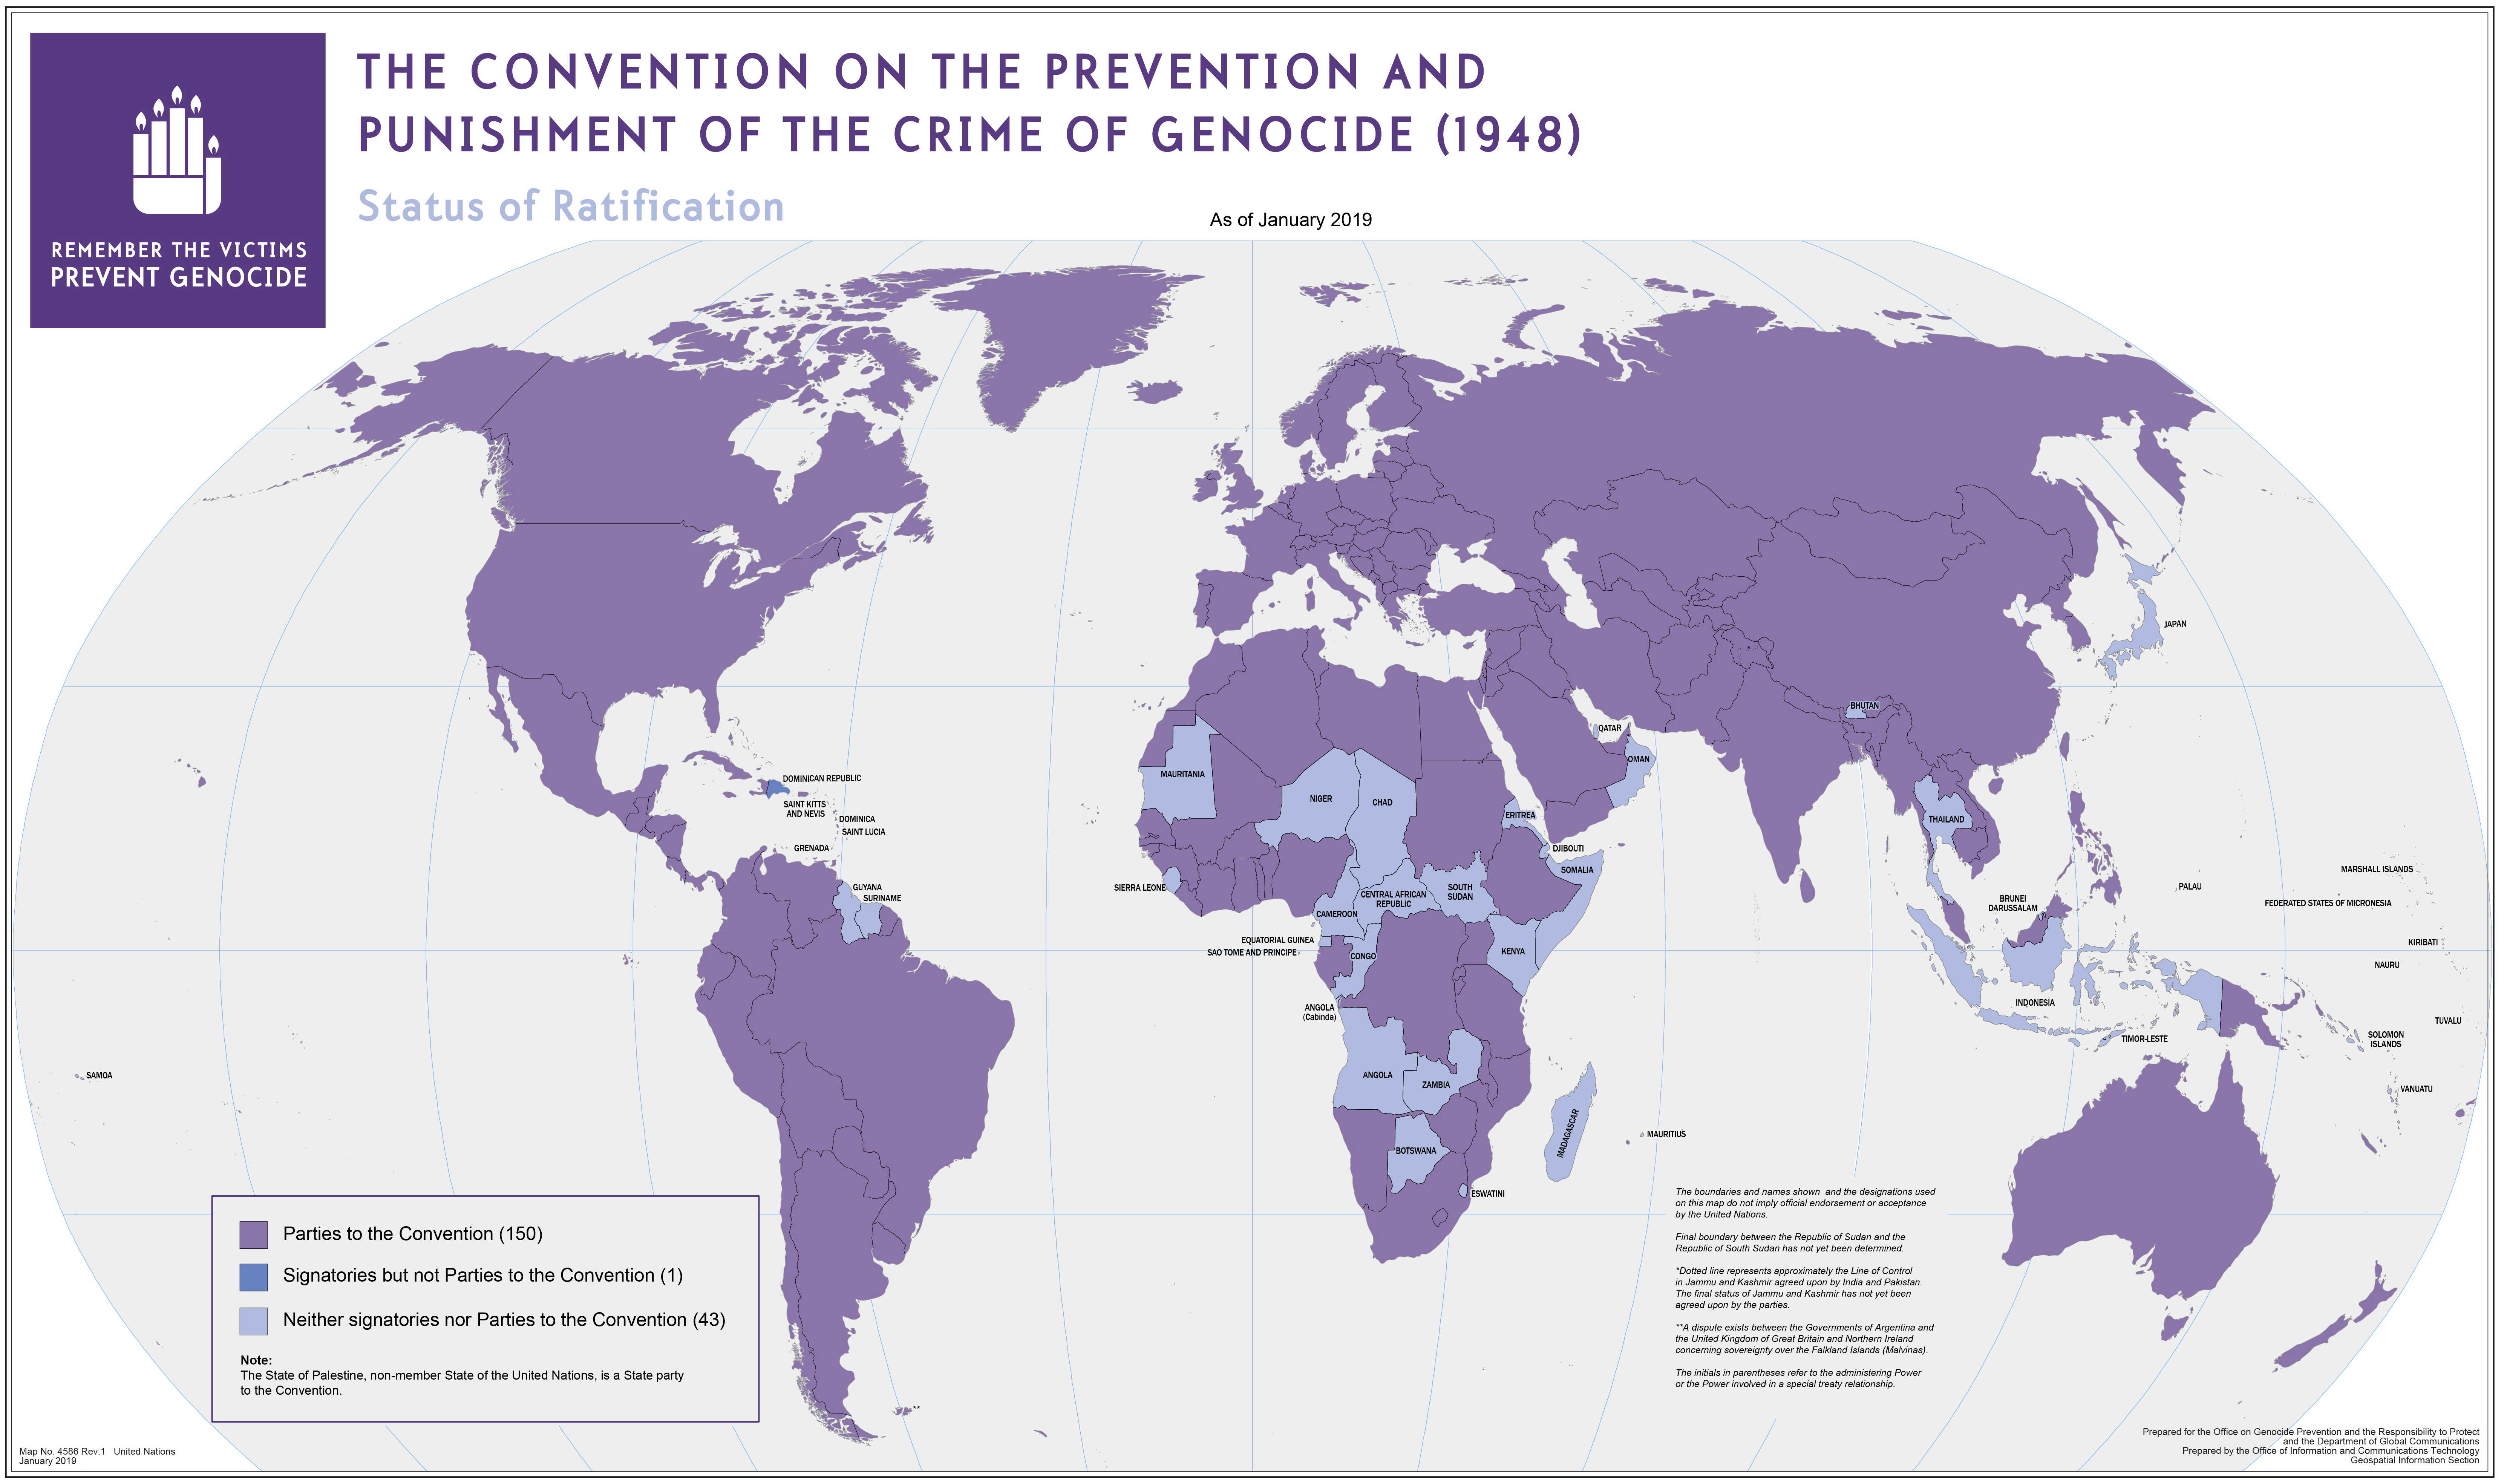 Status of ratification of the Genocide Convention